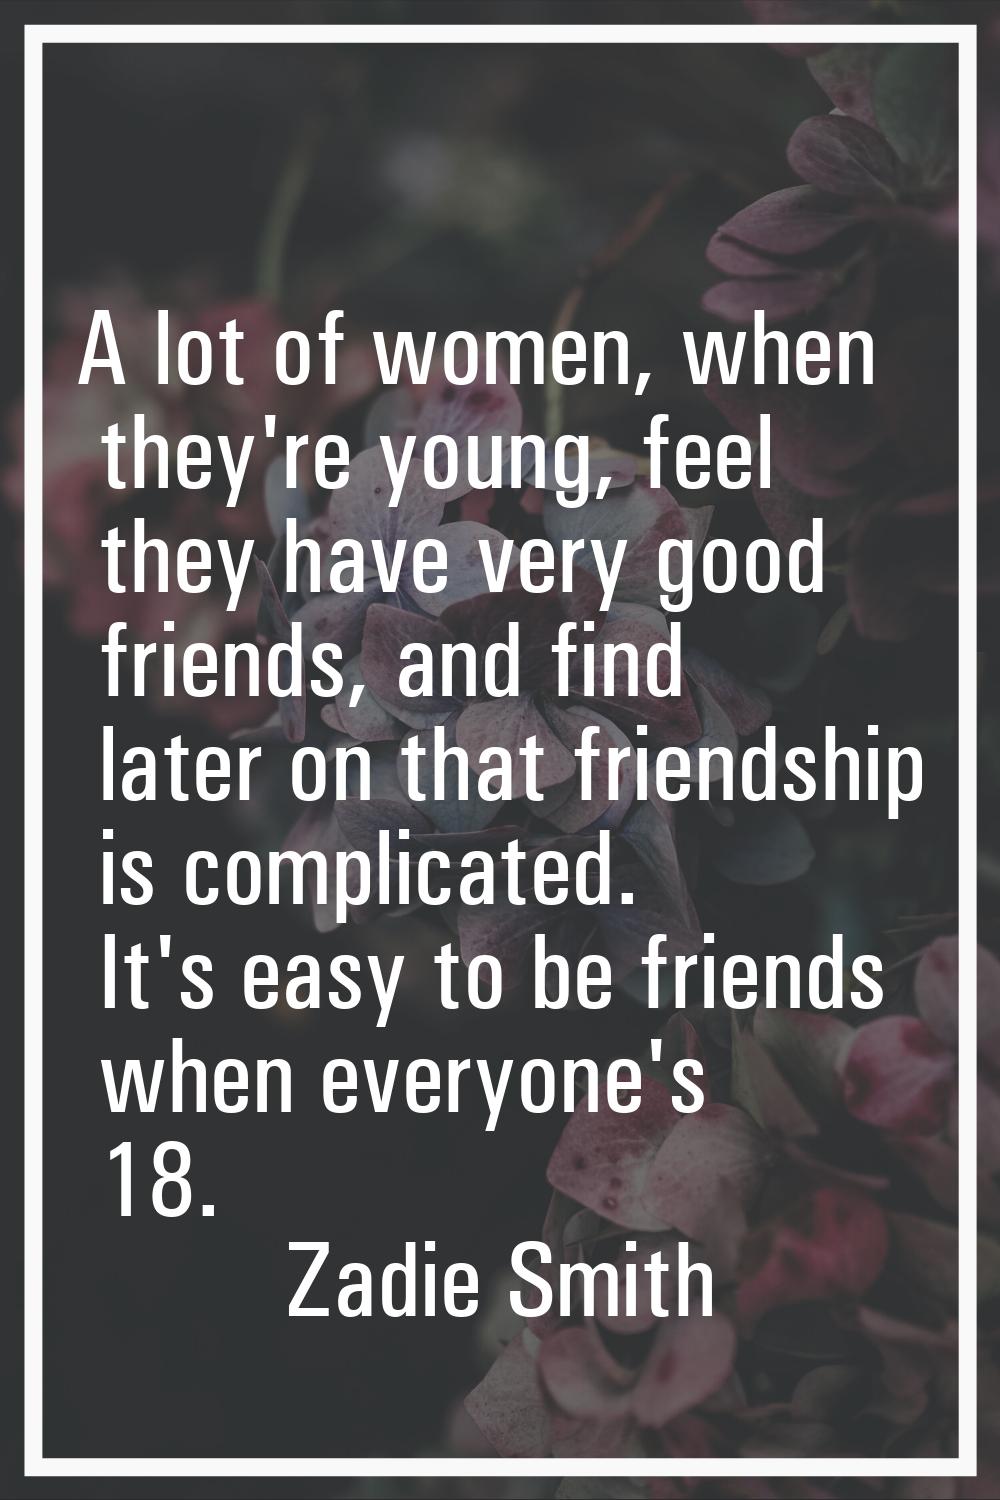 A lot of women, when they're young, feel they have very good friends, and find later on that friend